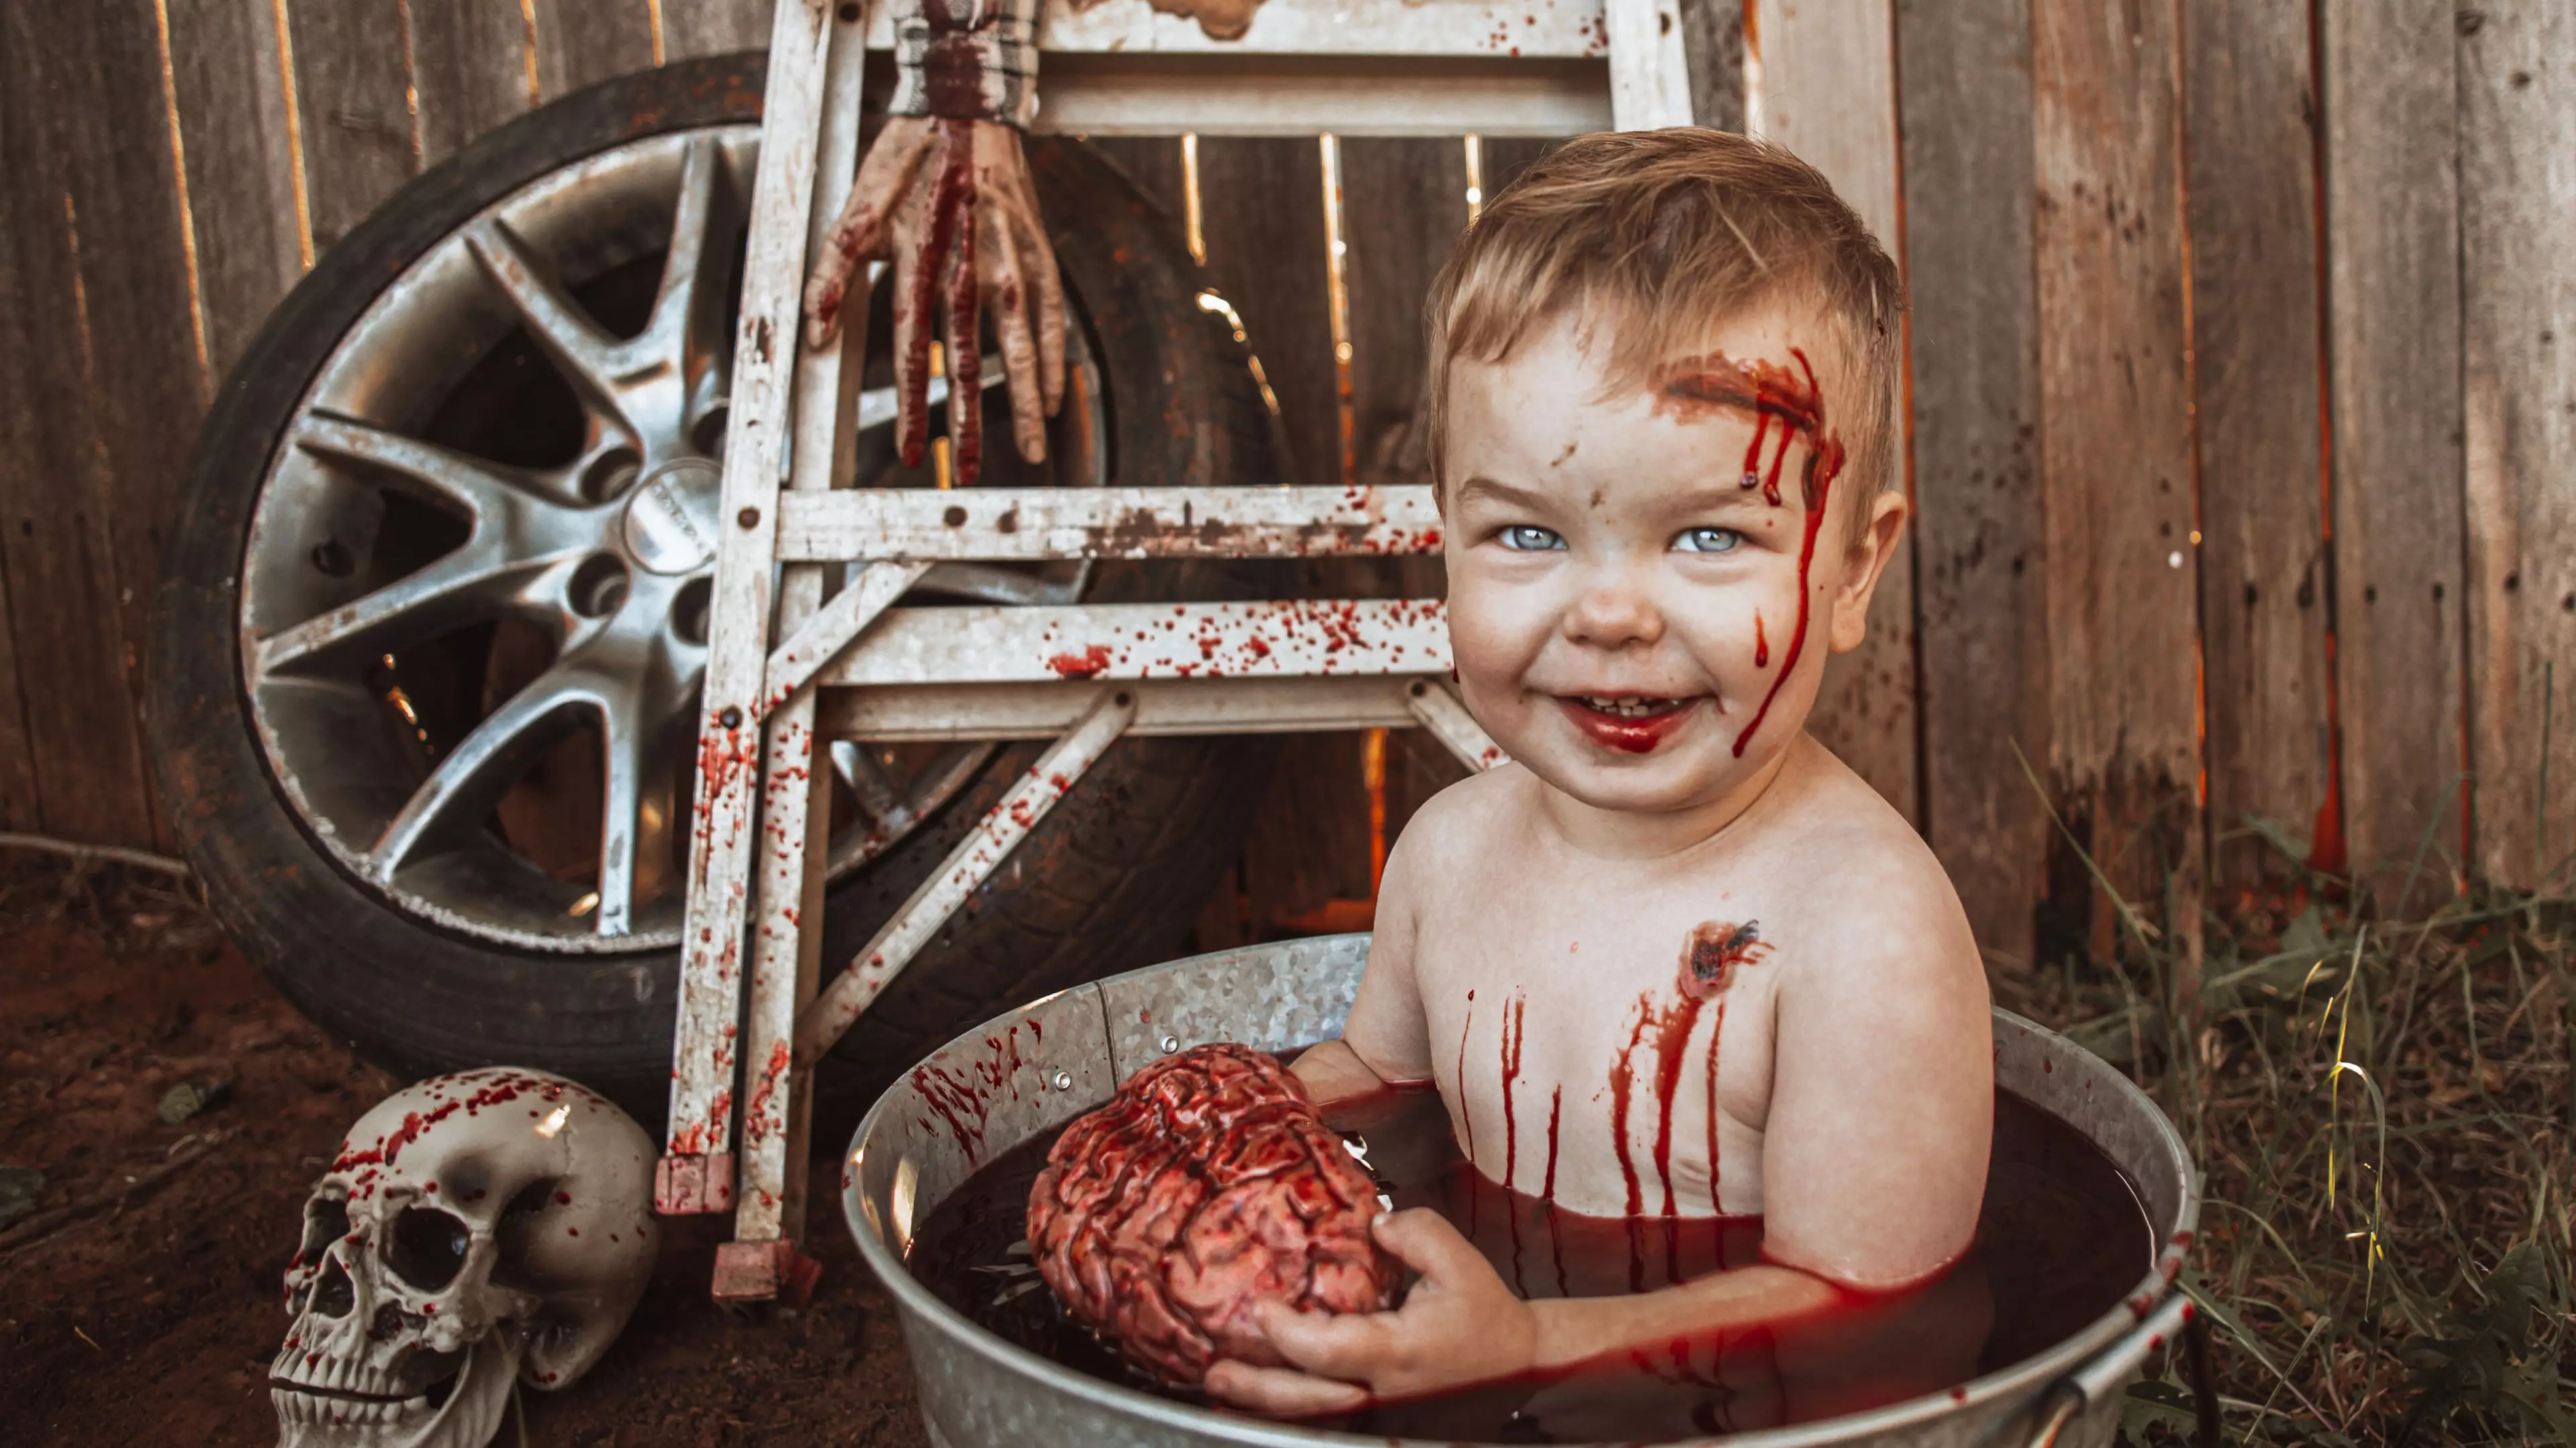 ​People Are Seriously Divided Over Toddler's Zombie-Themed Photo Shoot